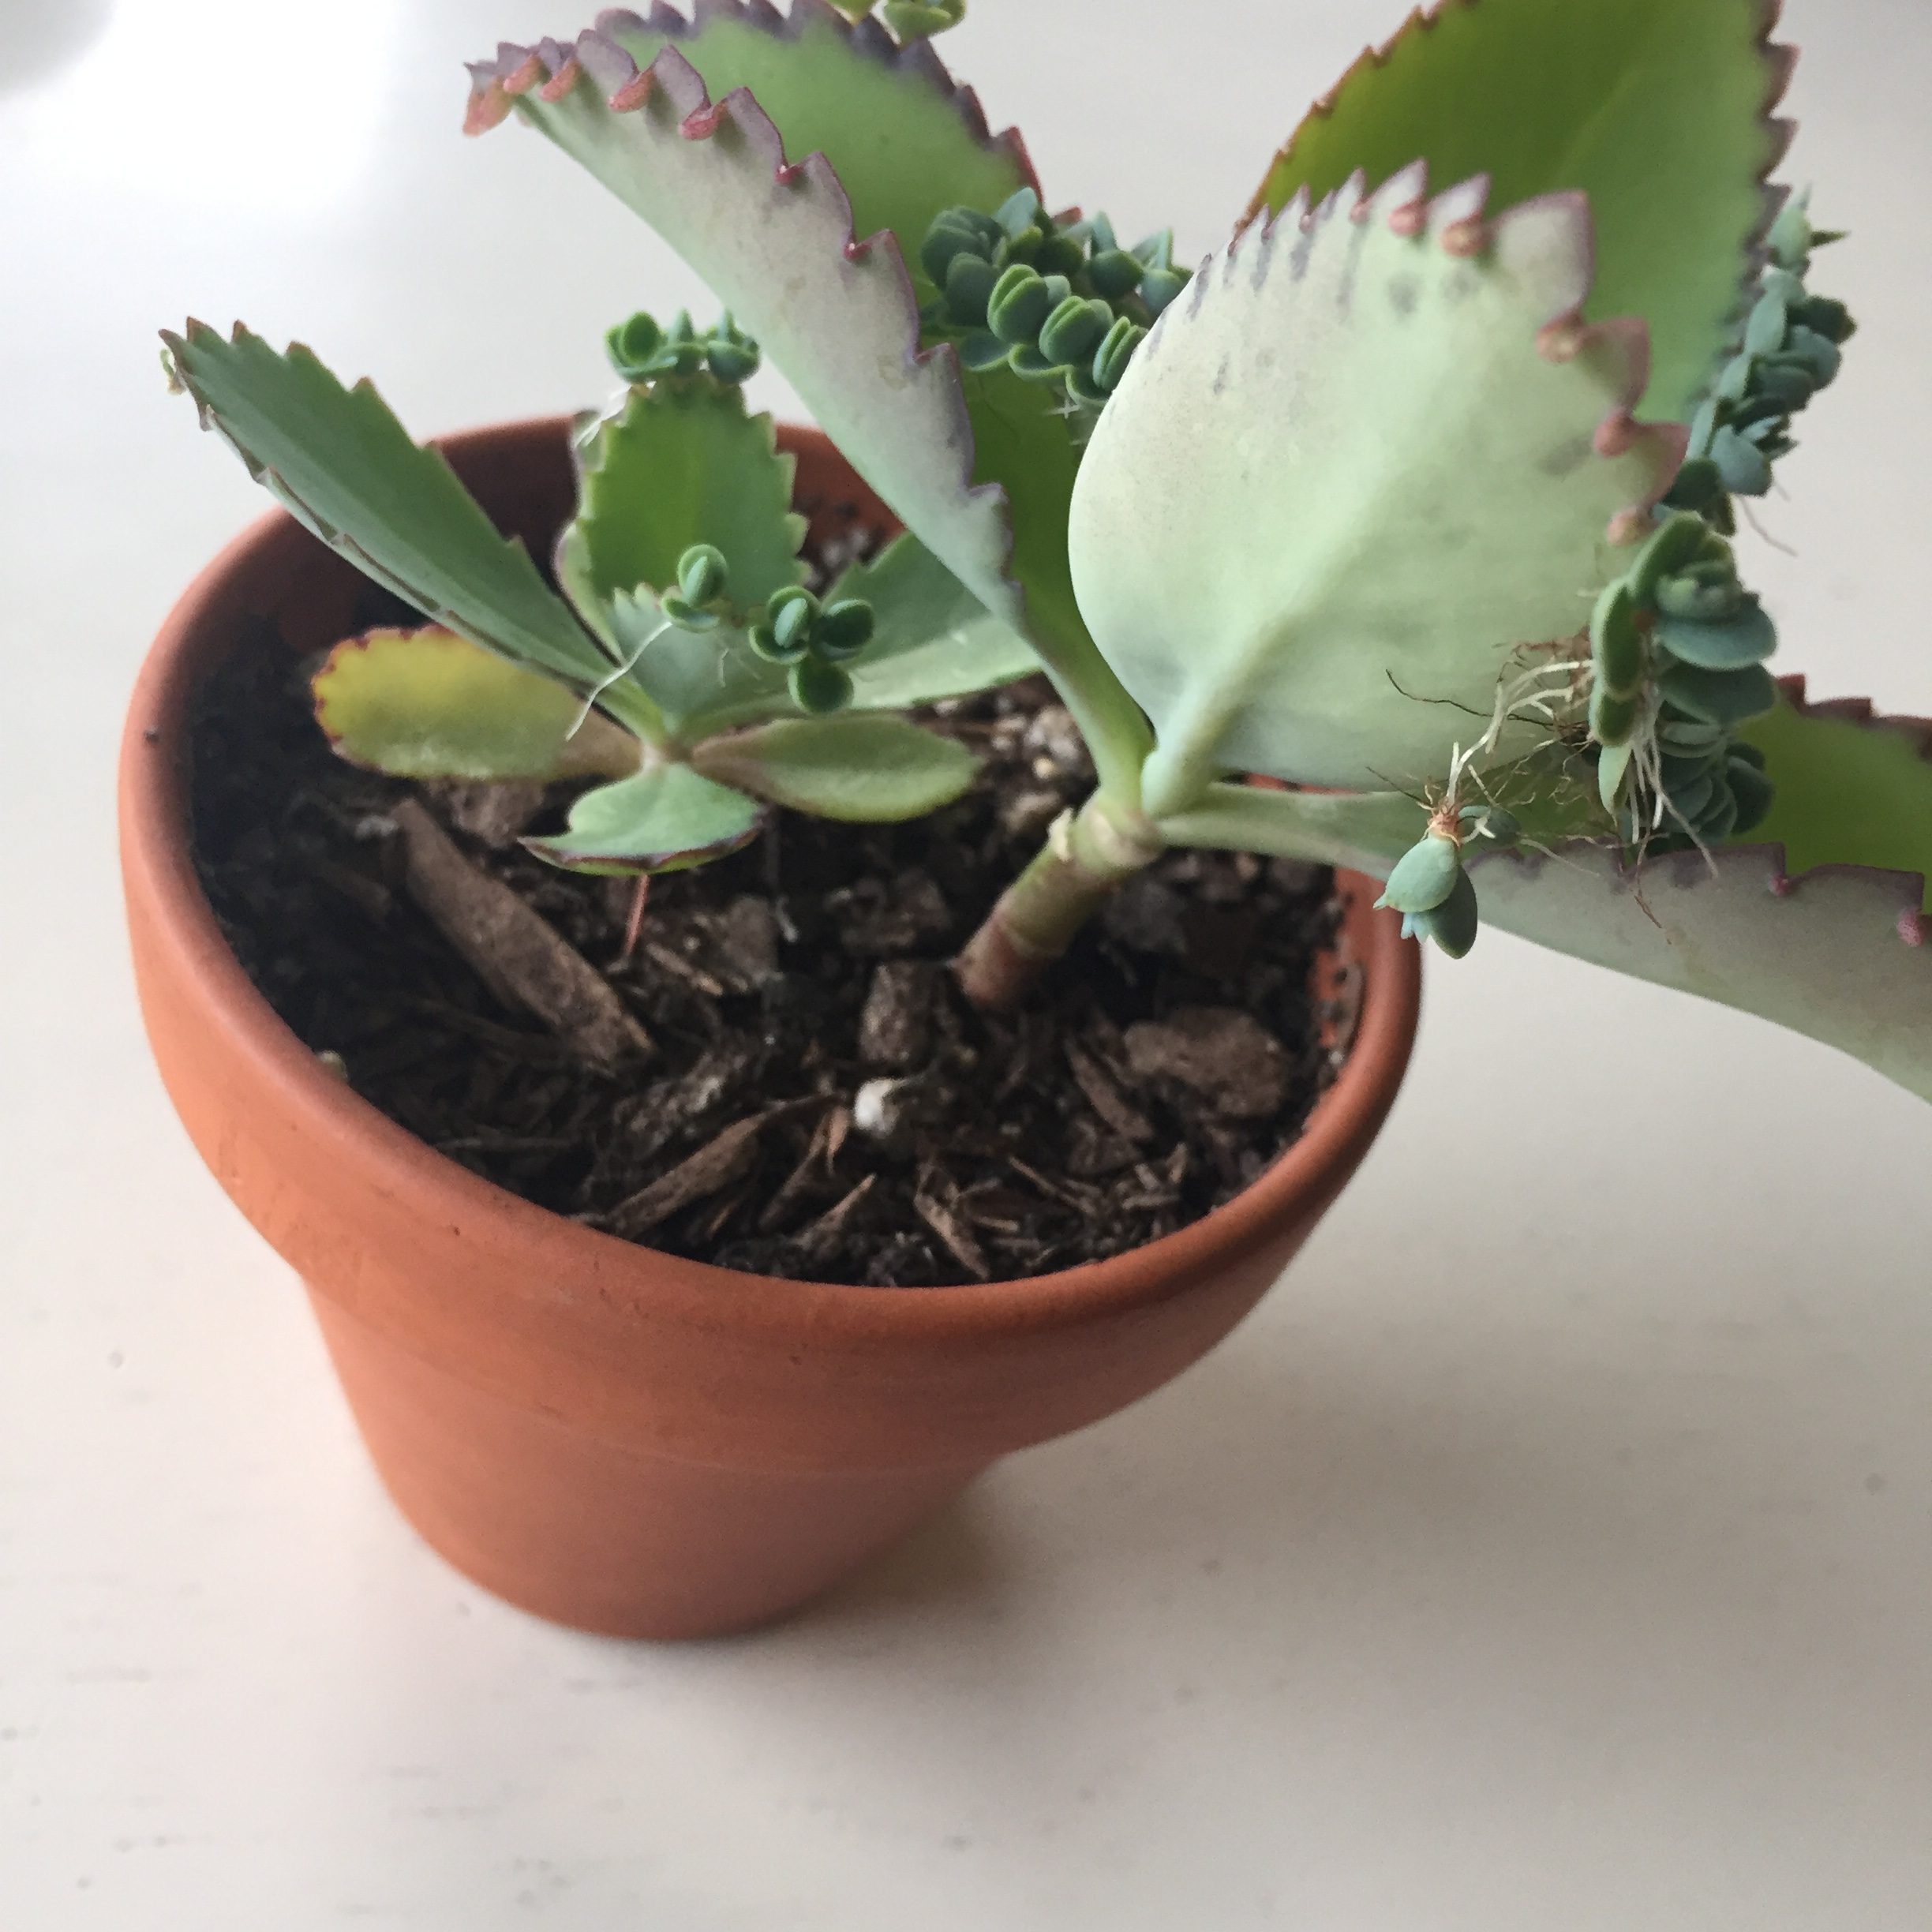 A Simple Trick to Growing Mother of Thousands Plantlets - SuburbanSill